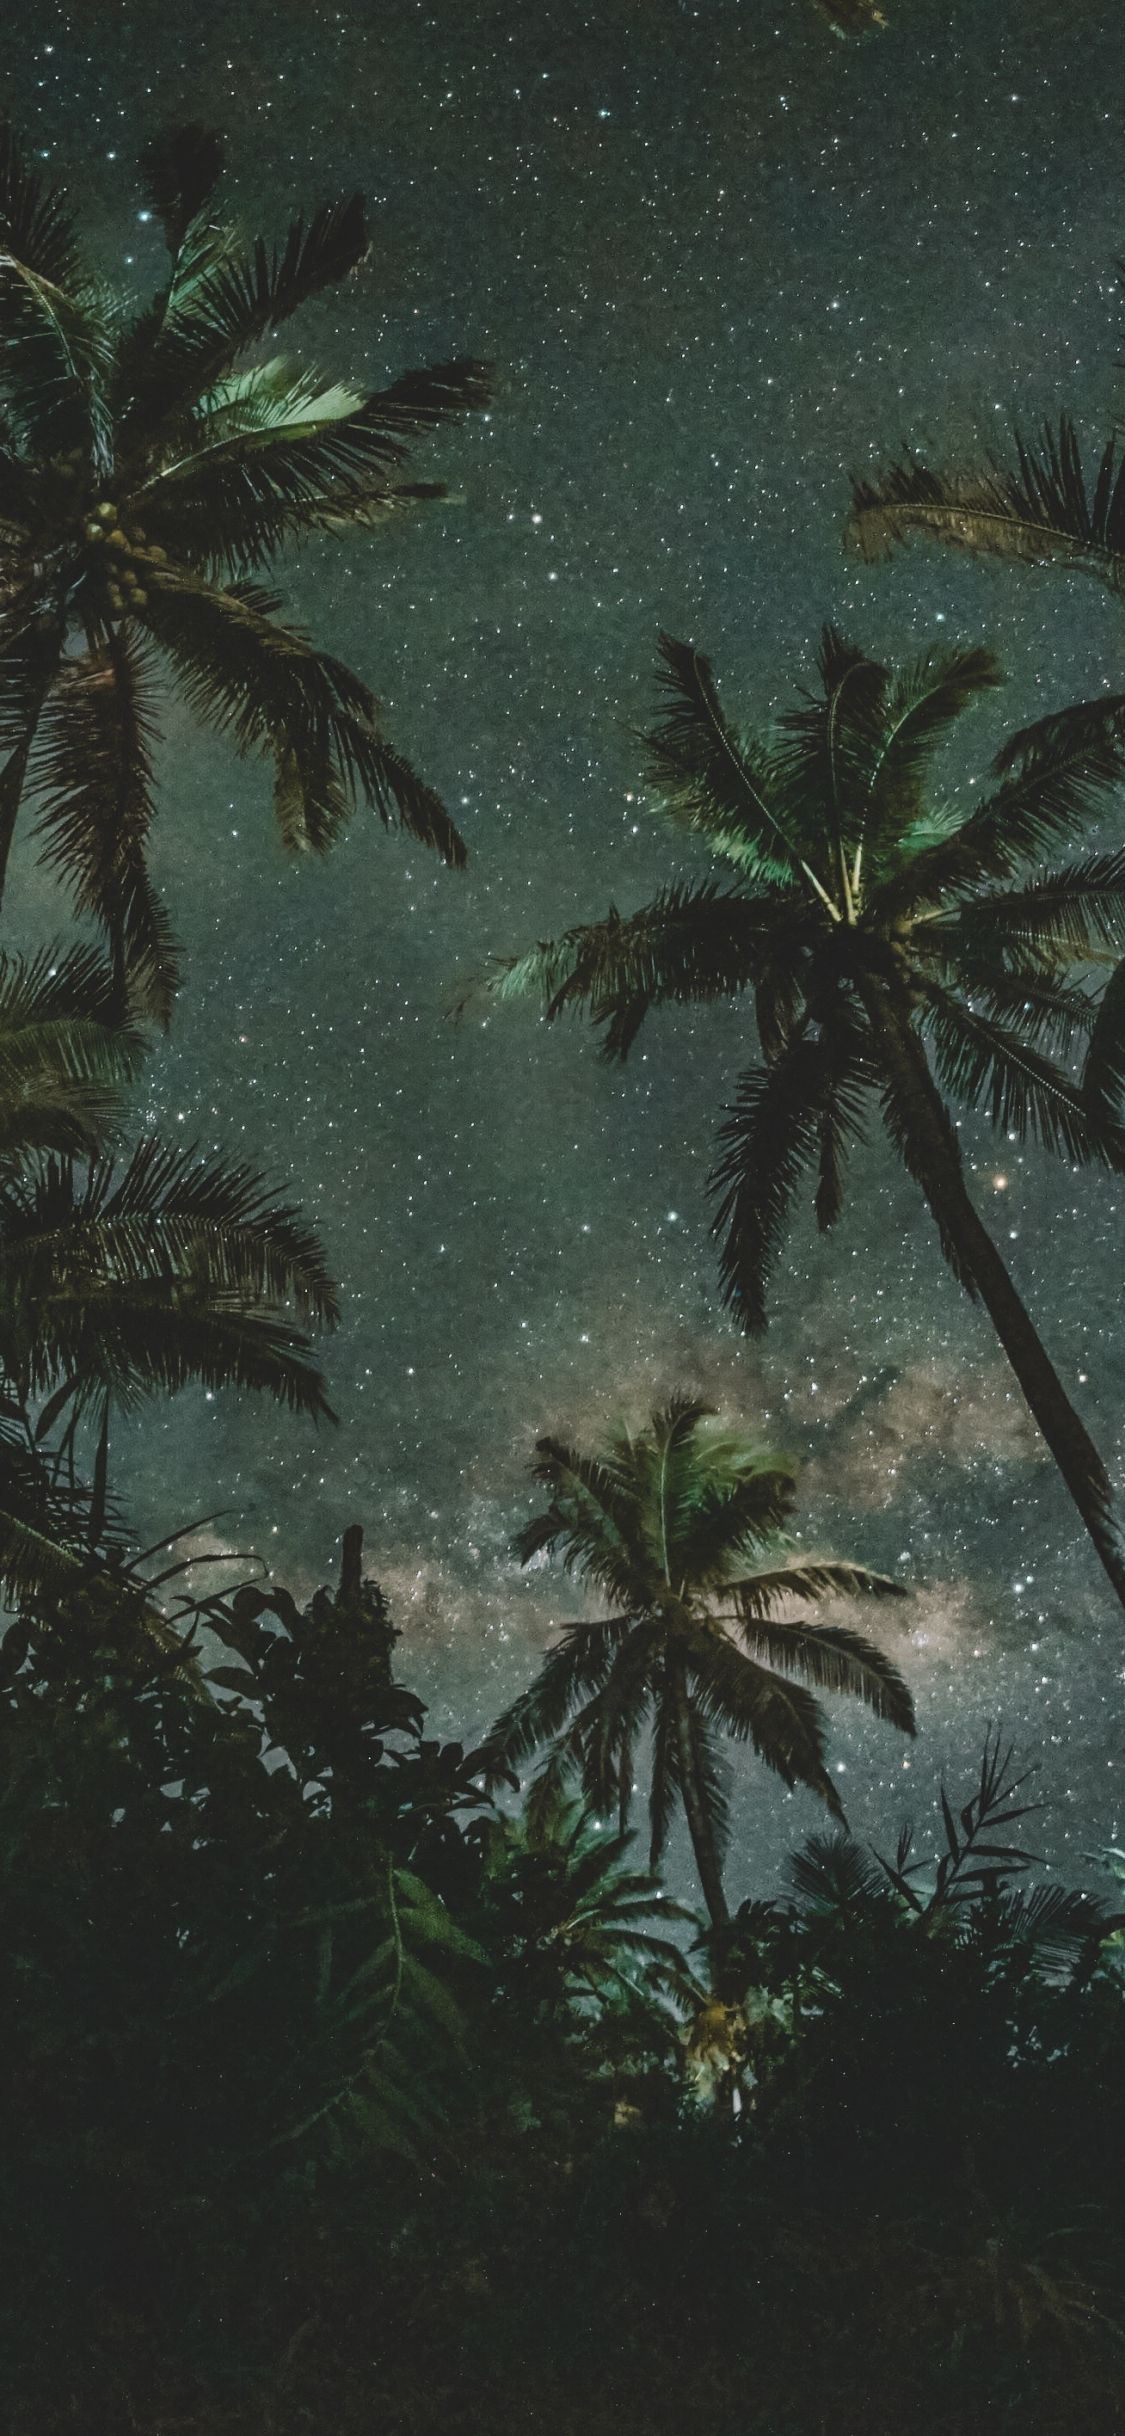 Download 1125x2436 wallpaper palm trees, night, starry night, nature, iphone x 1125x2436 HD image, background, 202